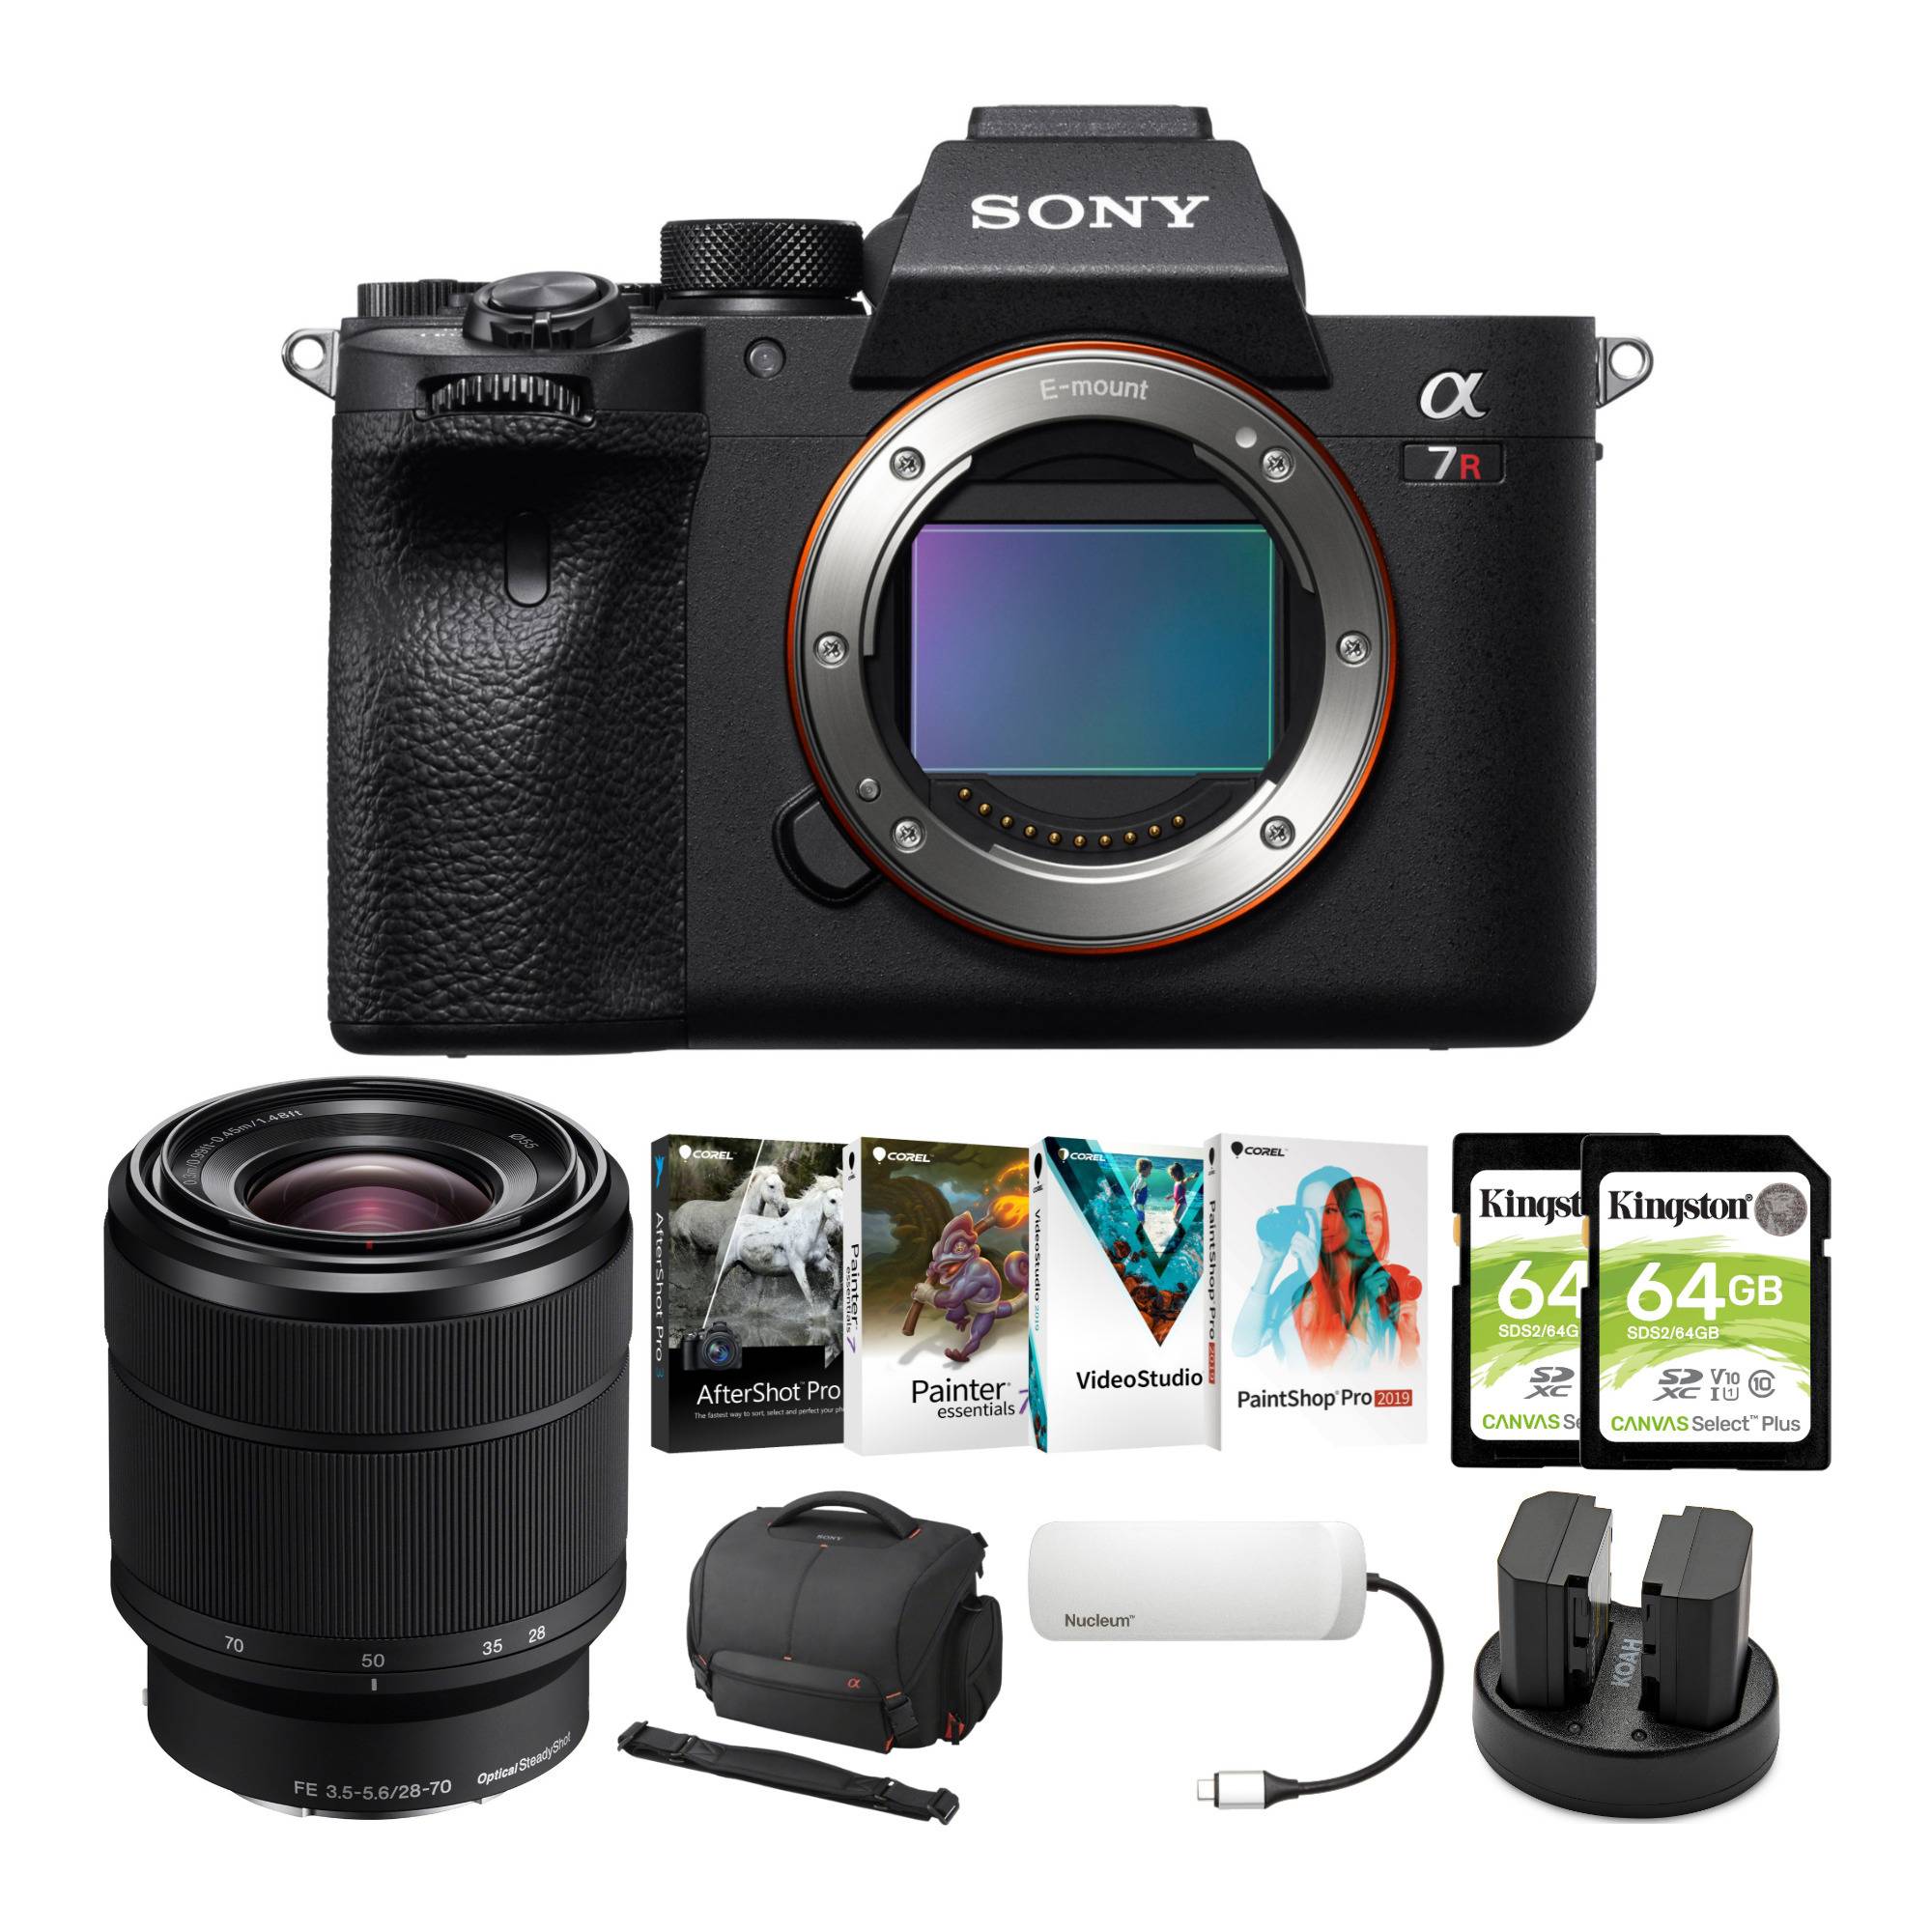 Sony Alpha a7R IV A Mirrorless Digital Camera Body with 28-70mm f/3.5-5.6 Lens and Software Suite